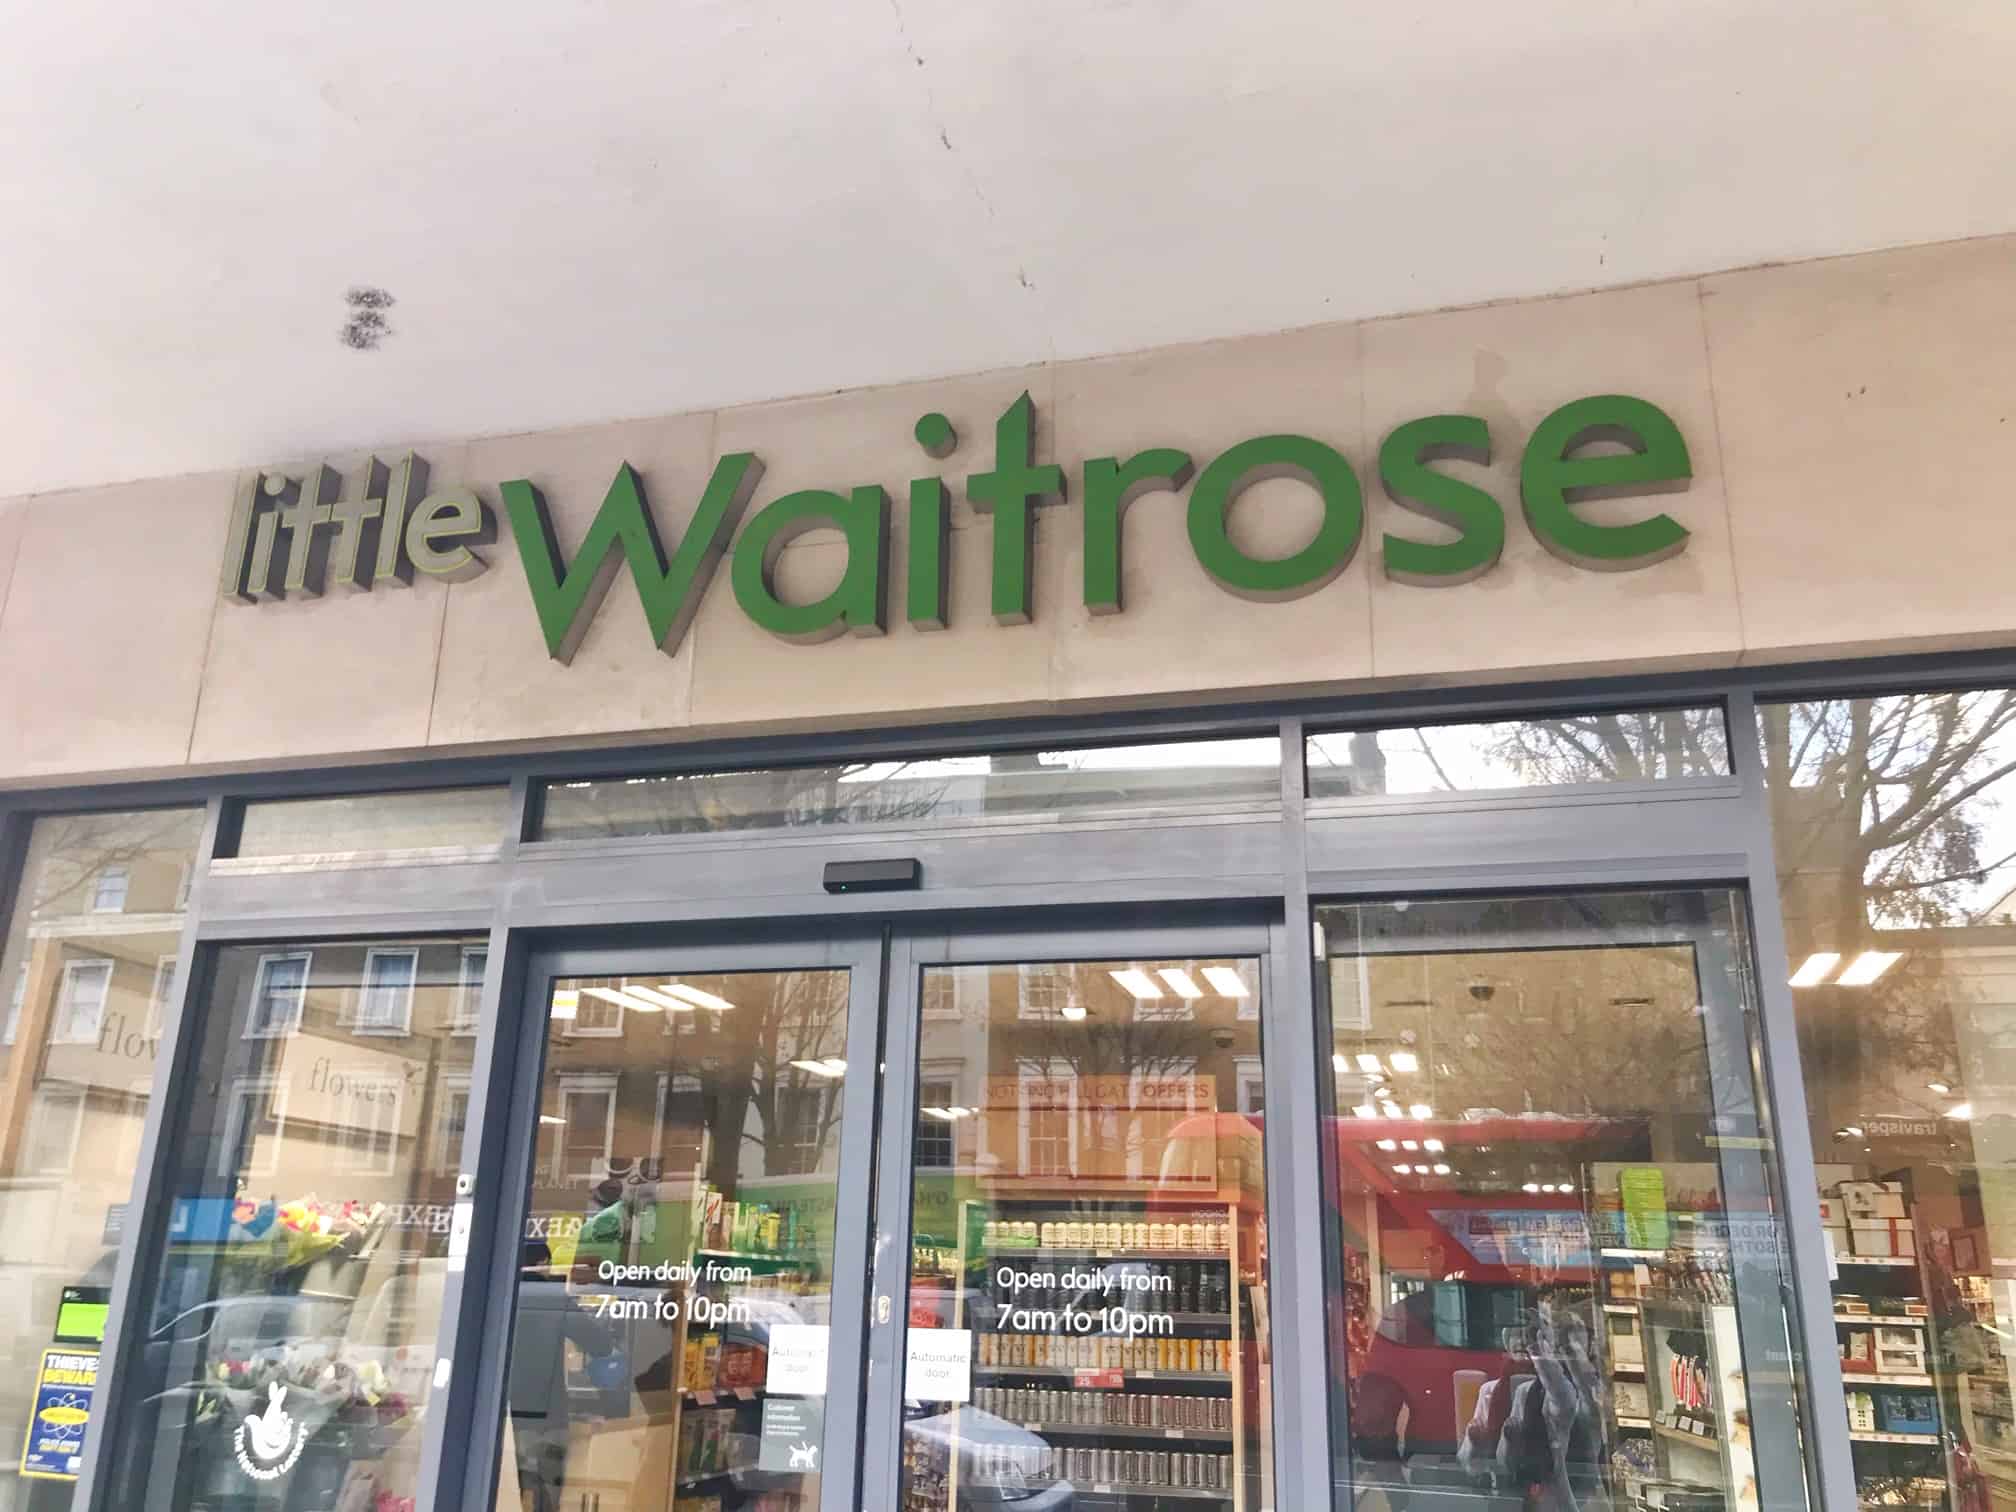 Waitrose is a popular type of london grocery store